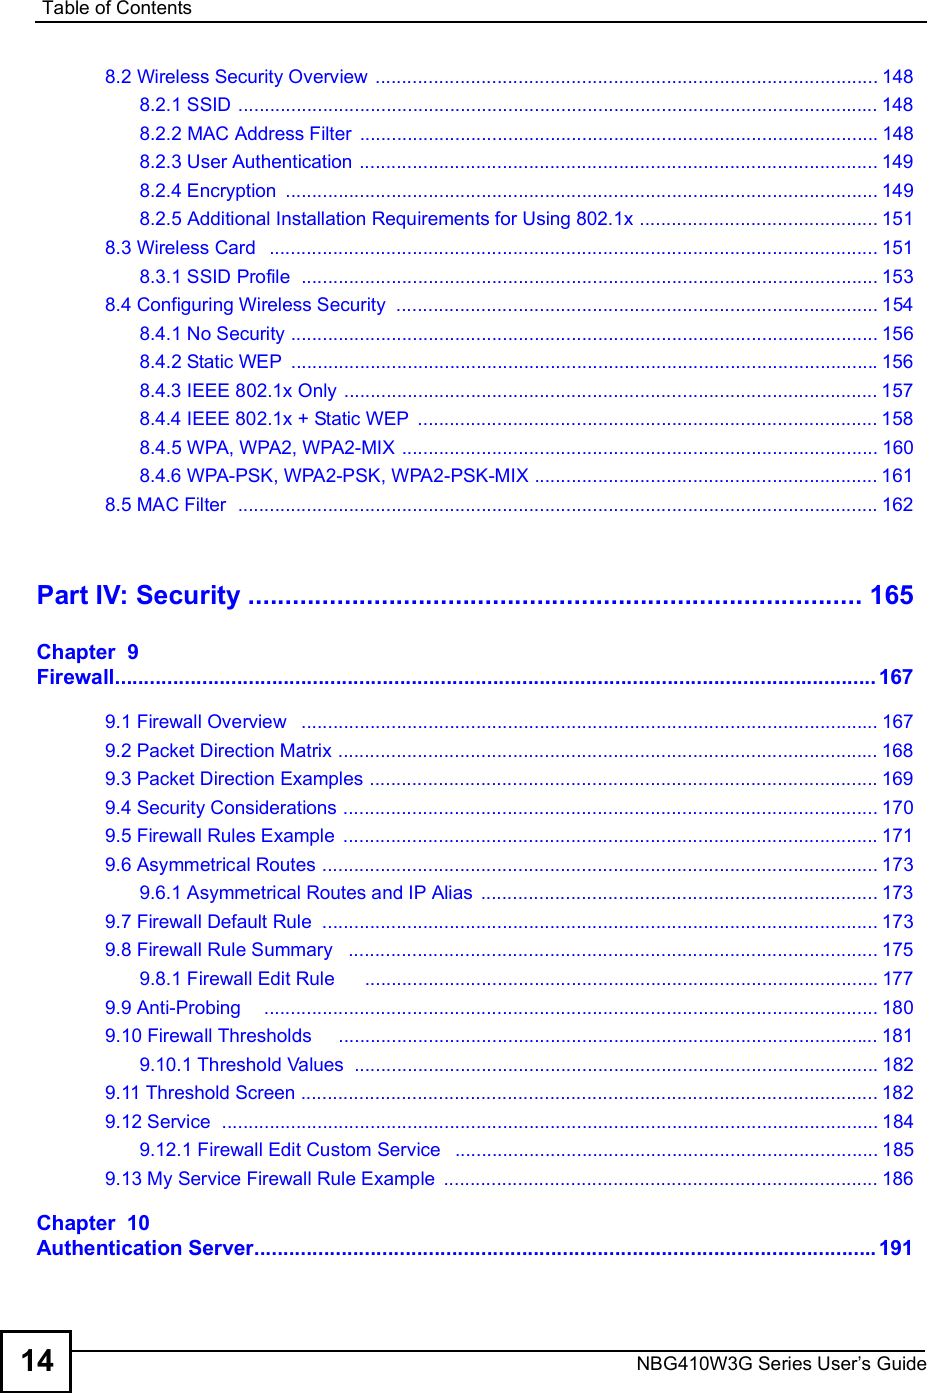 Table of ContentsNBG410W3G Series User s Guide148.2 Wireless Security Overview ...............................................................................................1488.2.1 SSID .........................................................................................................................1488.2.2 MAC Address Filter ..................................................................................................1488.2.3 User Authentication ..................................................................................................1498.2.4 Encryption ................................................................................................................1498.2.5 Additional Installation Requirements for Using 802.1x .............................................1518.3 Wireless Card  ...................................................................................................................1518.3.1 SSID Profile  .............................................................................................................1538.4 Configuring Wireless Security ...........................................................................................1548.4.1 No Security ...............................................................................................................1568.4.2 Static WEP ...............................................................................................................1568.4.3 IEEE 802.1x Only .....................................................................................................1578.4.4 IEEE 802.1x + Static WEP .......................................................................................1588.4.5 WPA, WPA2, WPA2-MIX ..........................................................................................1608.4.6 WPA-PSK, WPA2-PSK, WPA2-PSK-MIX .................................................................1618.5 MAC Filter  .........................................................................................................................162Part IV: Security...................................................................................165Chapter  9Firewall...................................................................................................................................1679.1 Firewall Overview  .............................................................................................................1679.2 Packet Direction Matrix ......................................................................................................1689.3 Packet Direction Examples ................................................................................................1699.4 Security Considerations .....................................................................................................1709.5 Firewall Rules Example .....................................................................................................1719.6 Asymmetrical Routes .........................................................................................................1739.6.1 Asymmetrical Routes and IP Alias ...........................................................................1739.7 Firewall Default Rule .........................................................................................................1739.8 Firewall Rule Summary  ....................................................................................................1759.8.1 Firewall Edit Rule     .................................................................................................1779.9 Anti-Probing    ....................................................................................................................1809.10 Firewall Thresholds    ......................................................................................................1819.10.1 Threshold Values ...................................................................................................1829.11 Threshold Screen .............................................................................................................1829.12 Service  ............................................................................................................................1849.12.1 Firewall Edit Custom Service  ................................................................................1859.13 My Service Firewall Rule Example ..................................................................................186Chapter  10Authentication Server...........................................................................................................191